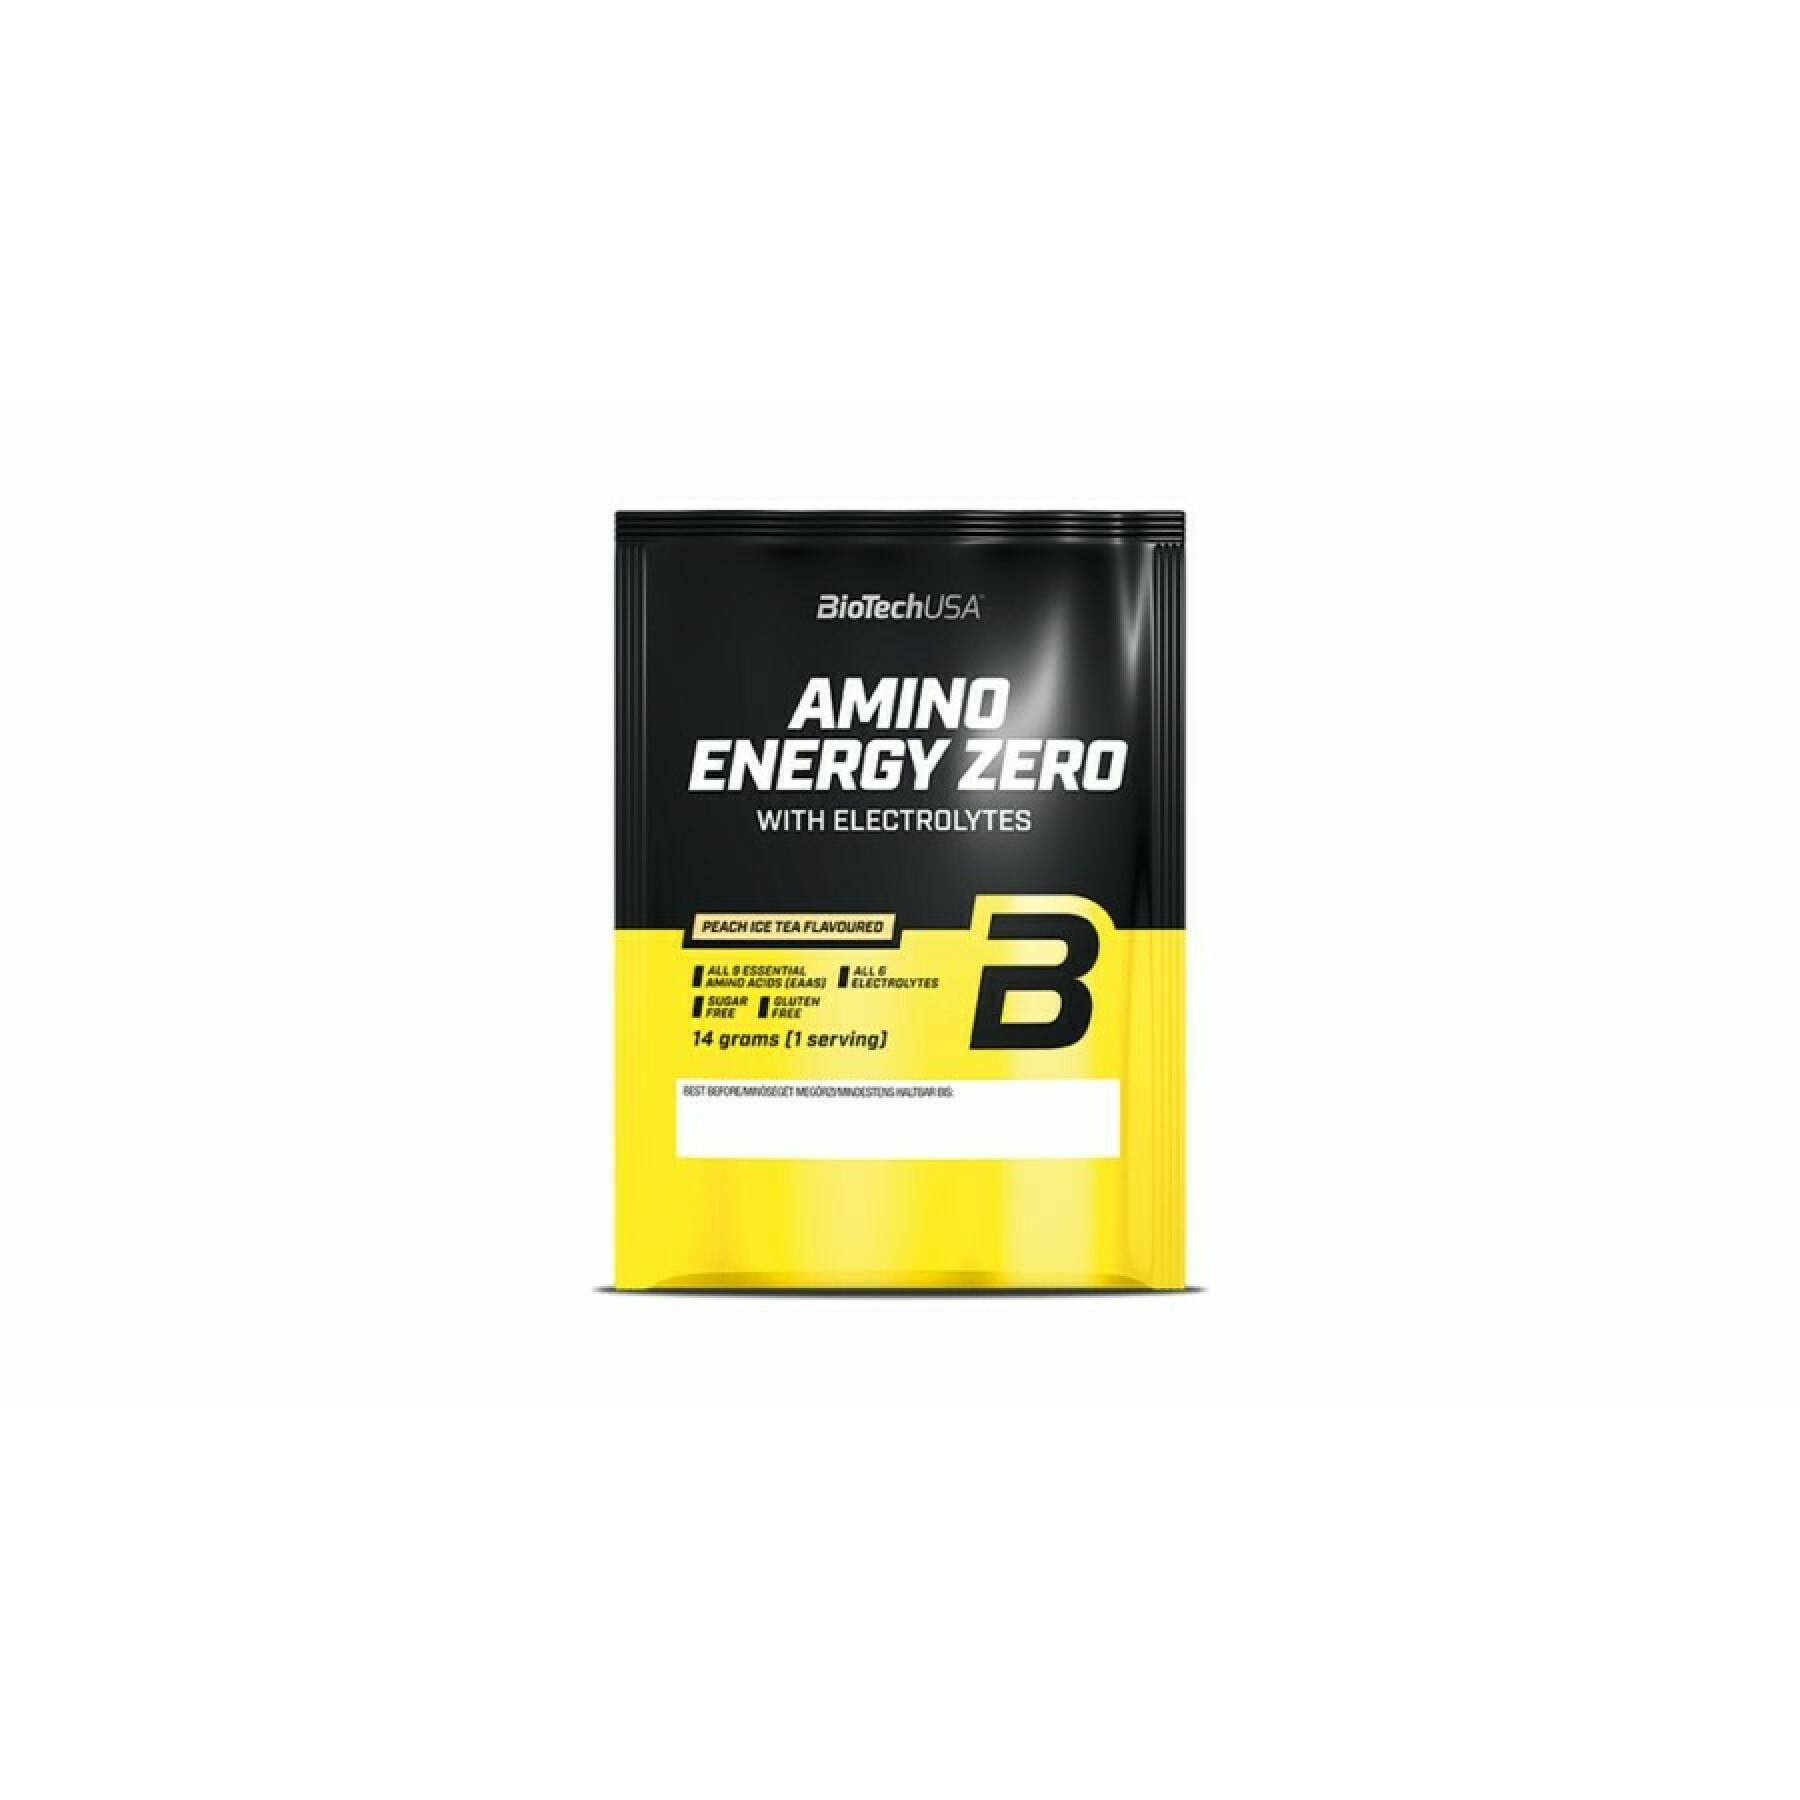 50 packets of amino acids with electrolytes Biotech USA amino energy zero - Thé glacé aux pêches - 14g